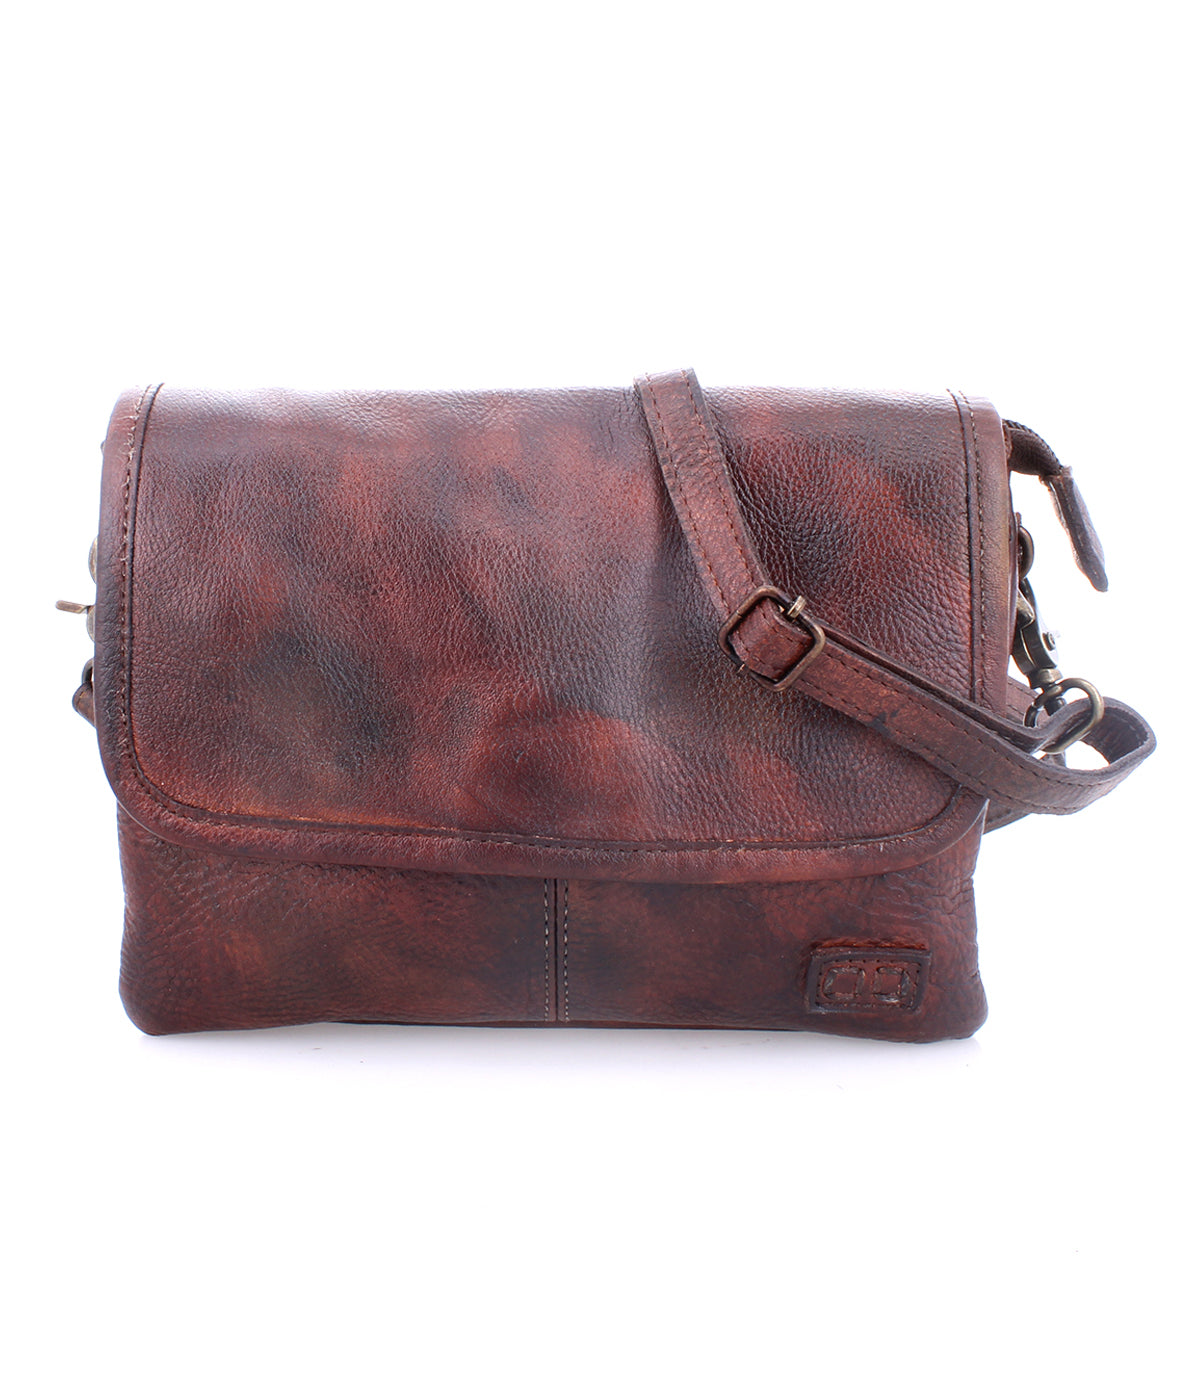 The Ziggy brown leather hand bag by Bed Stu.